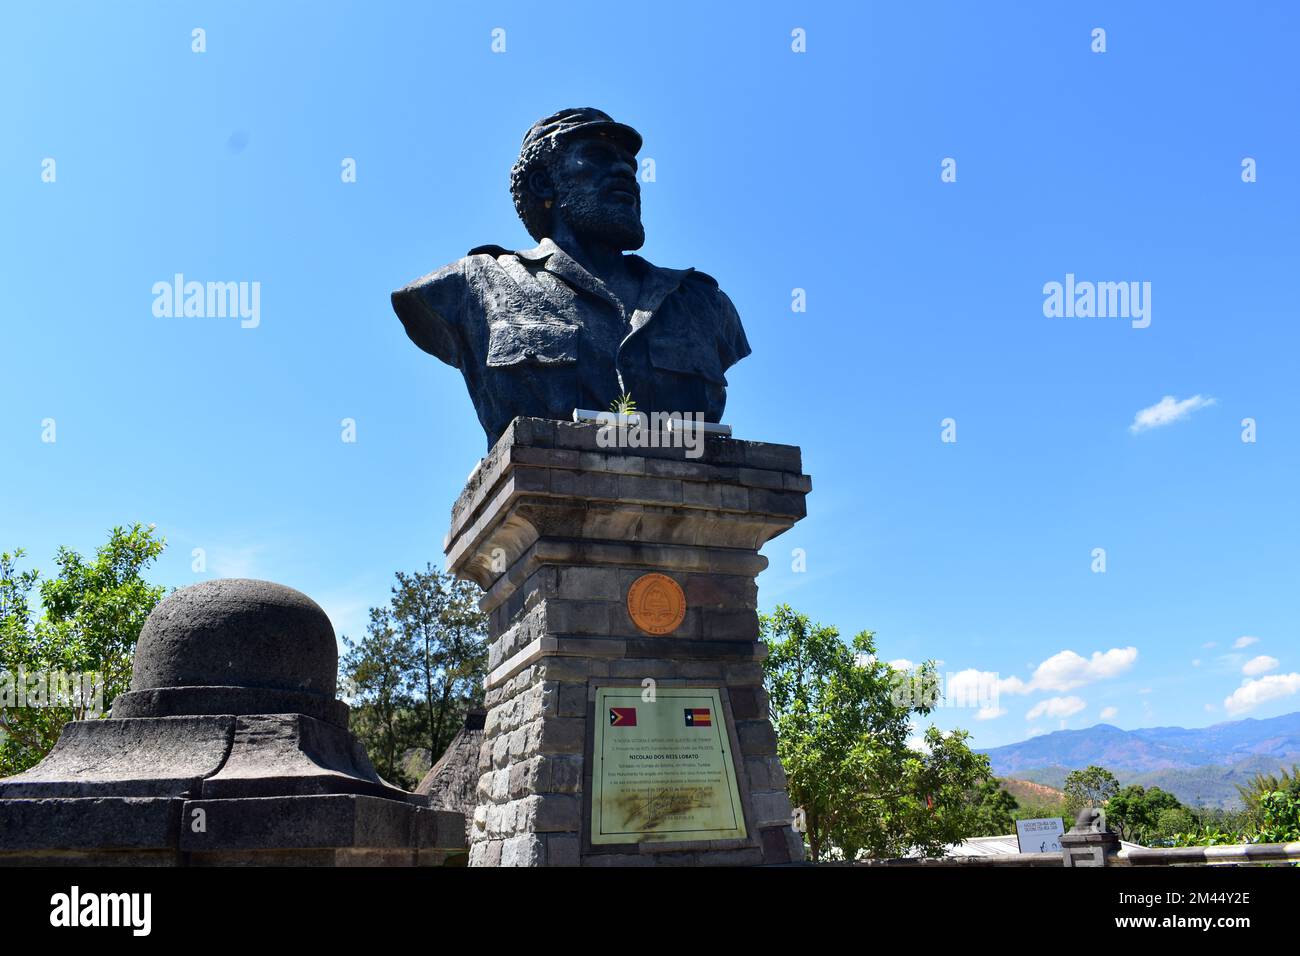 Momentum Of President Nicolau Lobato ' which is located in the 'Aisirimou, Aileu, East Timor. Stock Photo